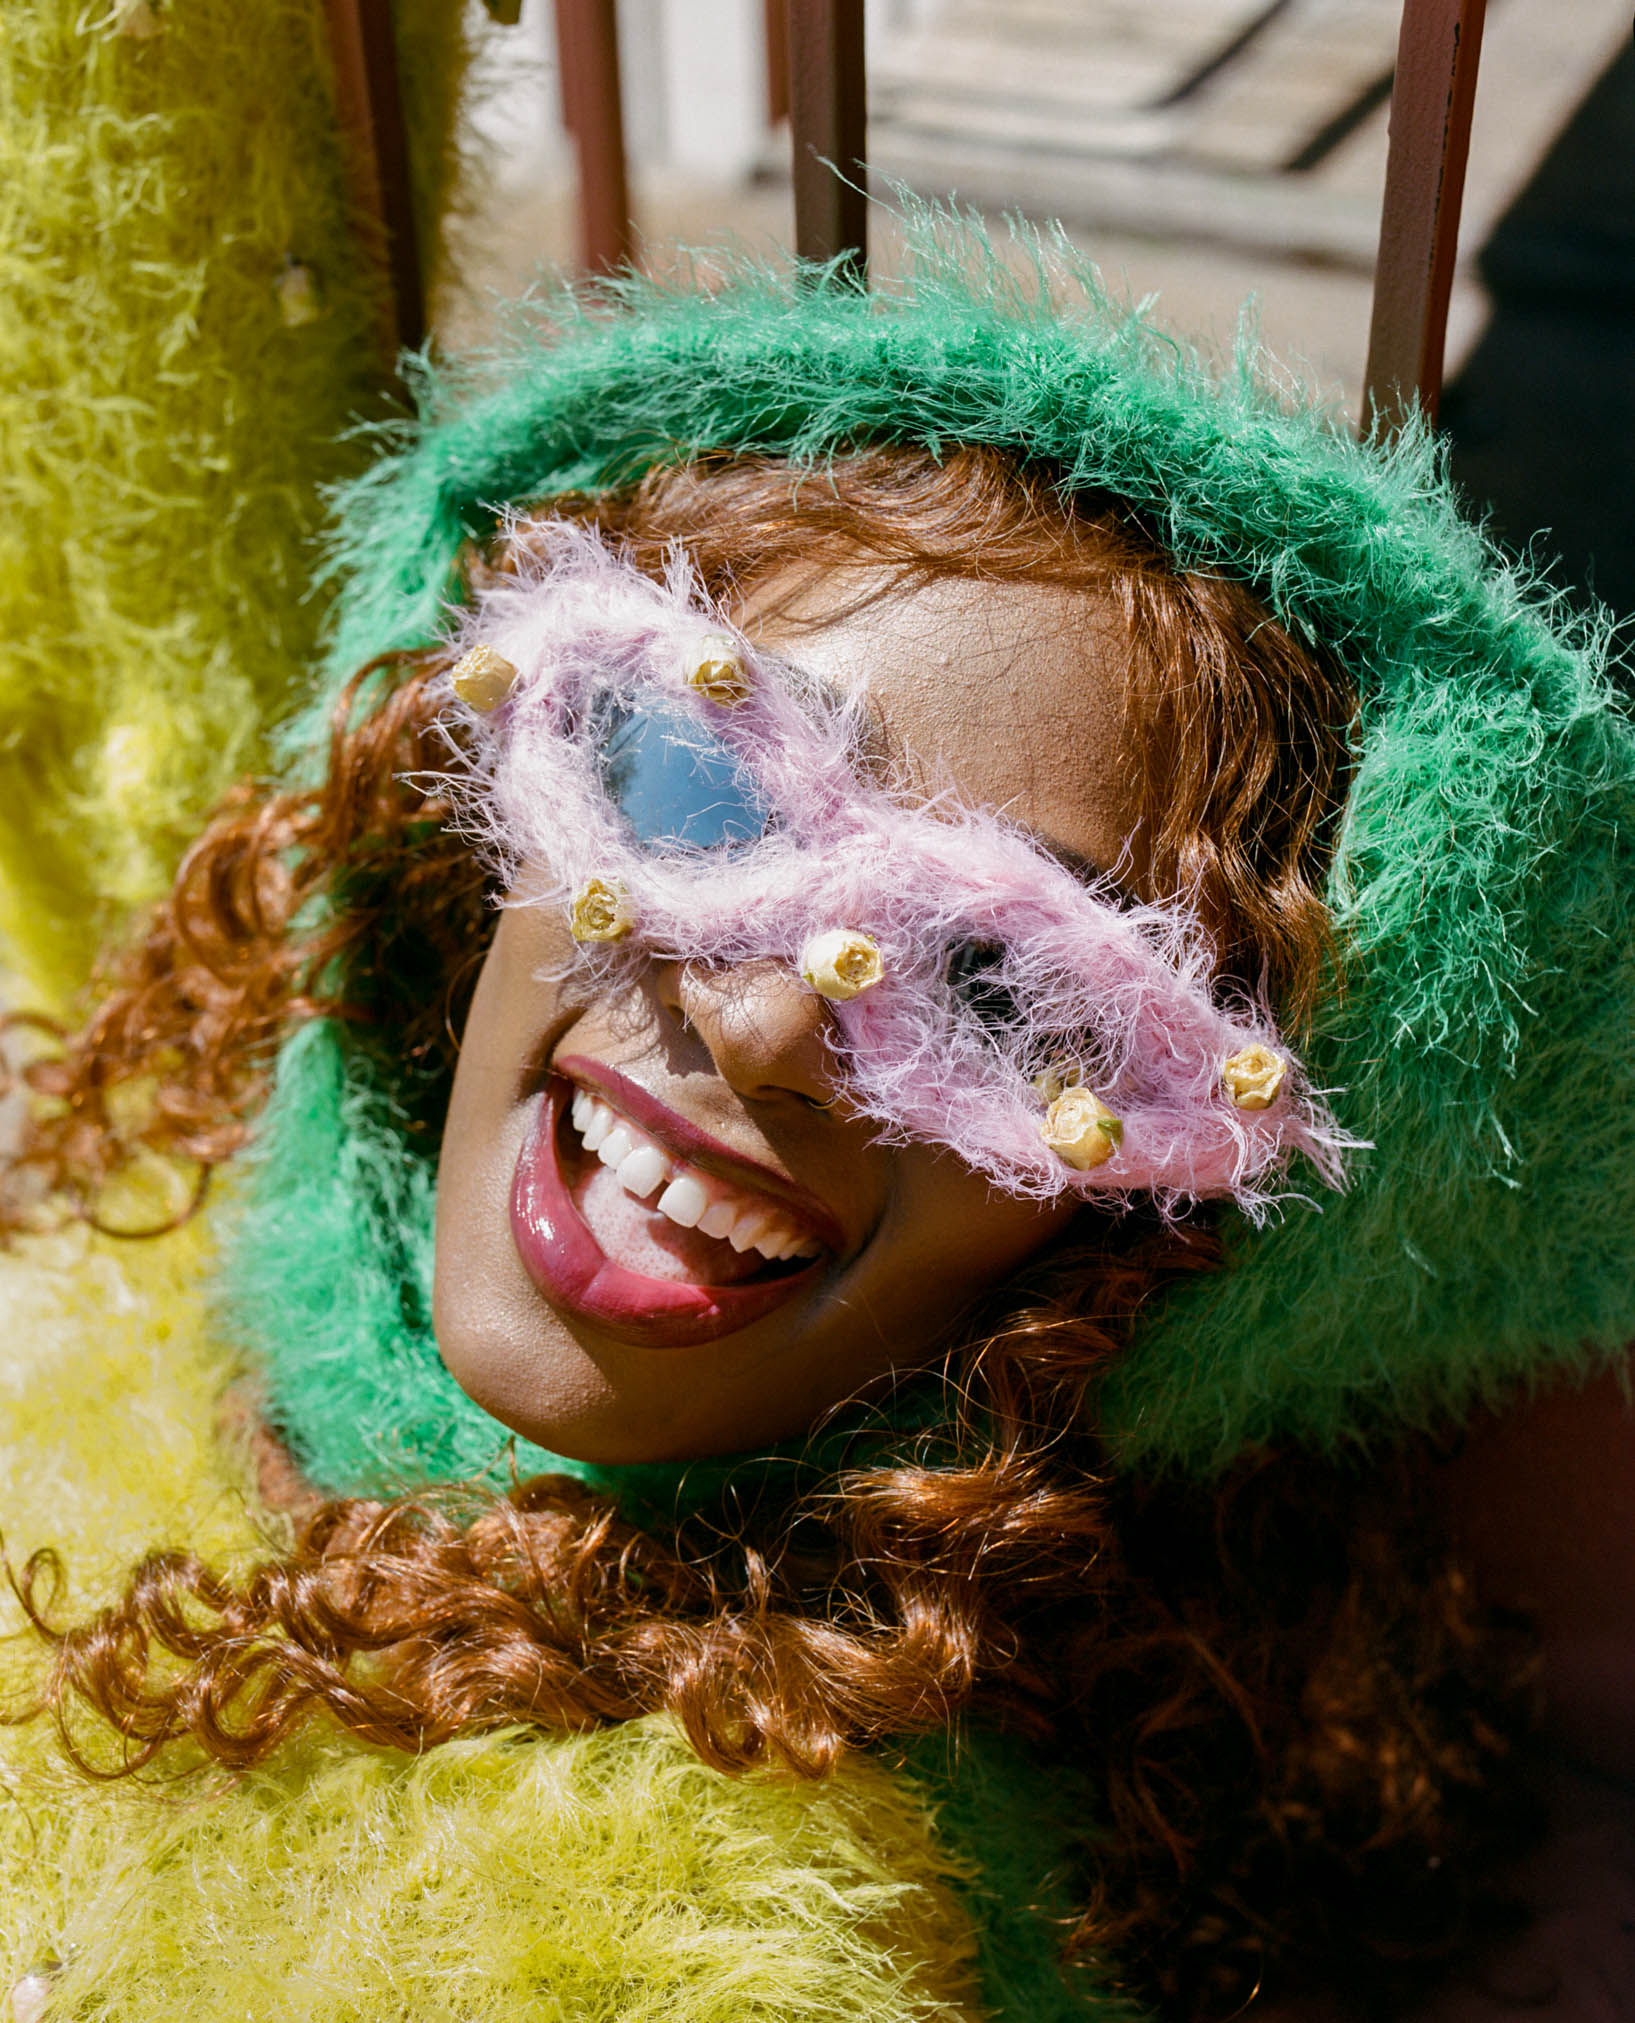 rapper kari faux smiling with her mouth open wearing fuzzy sunglasses